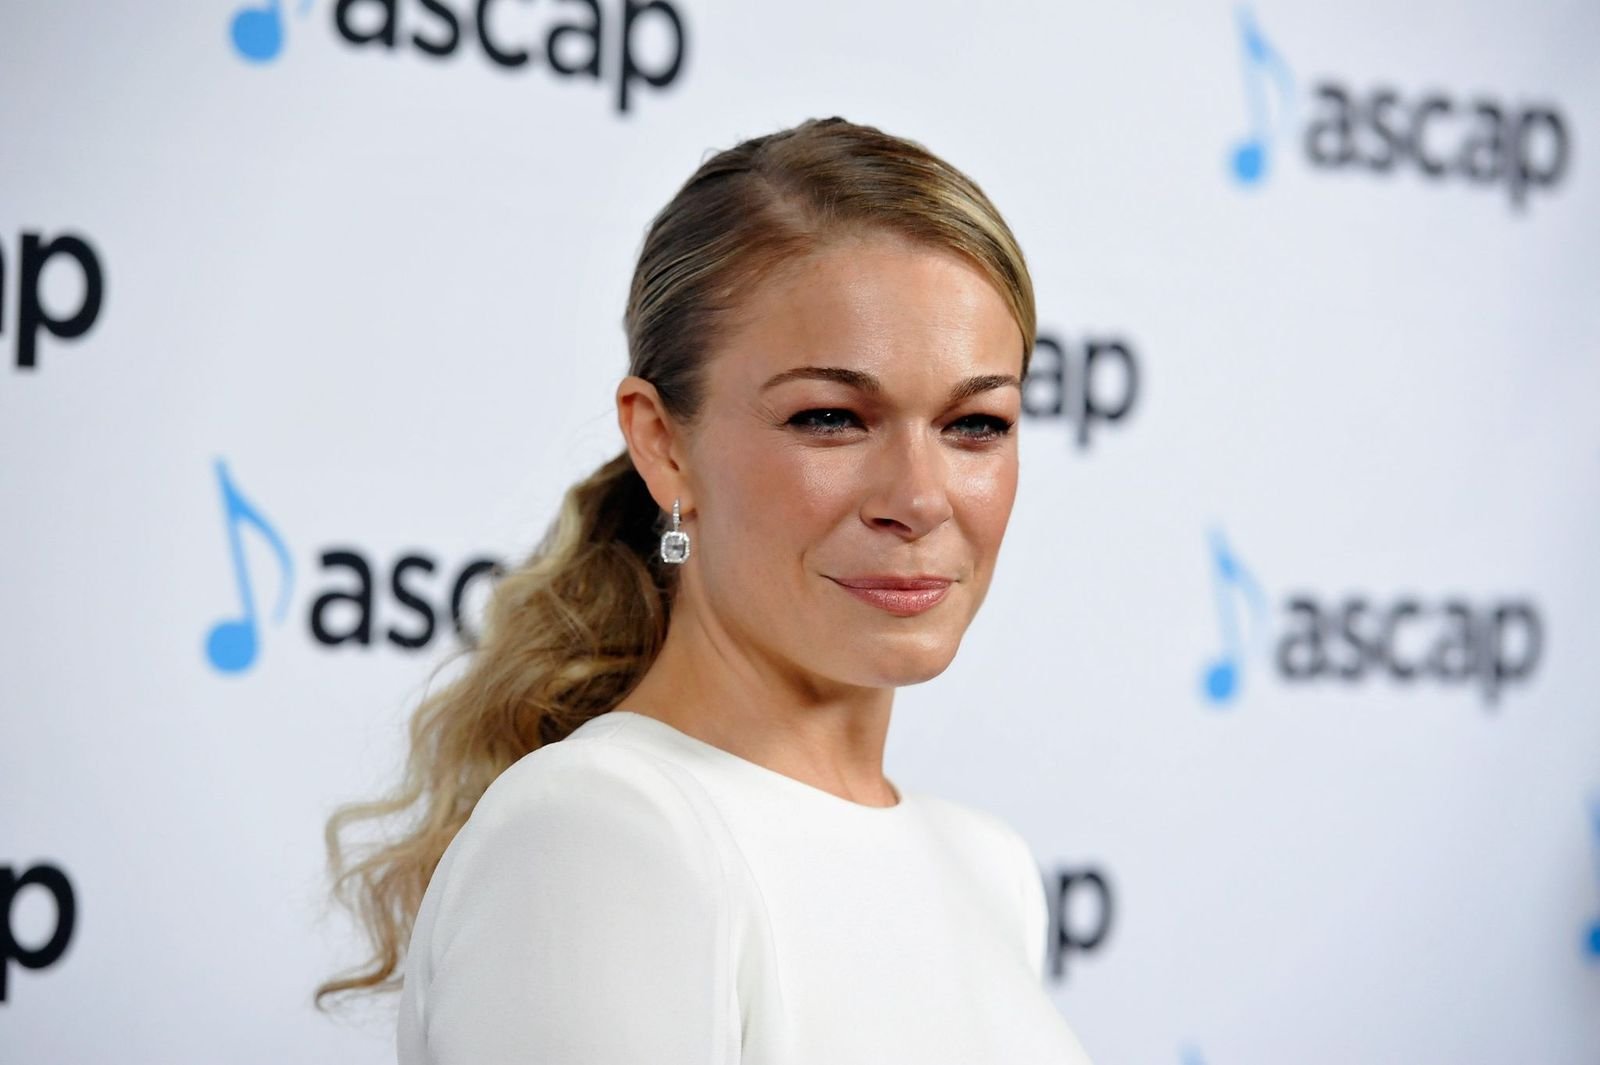 LeAnn Rimes at the 34th Annual ASCAP Pop Music Awards at The Wiltern on May 18, 2017 in Los Angeles, United States | Photo: Getty Images